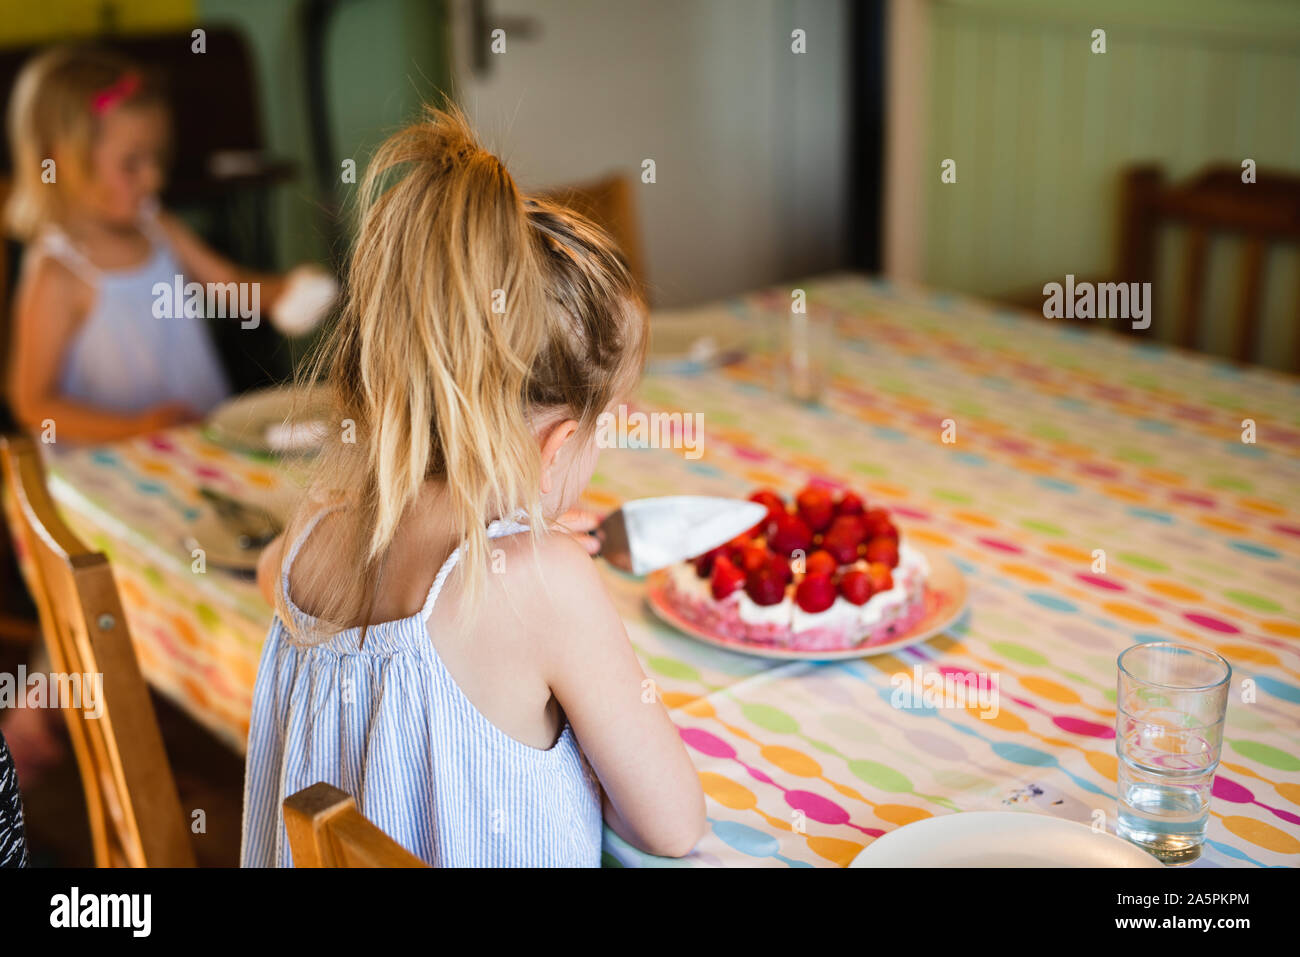 Girl at table Stock Photo